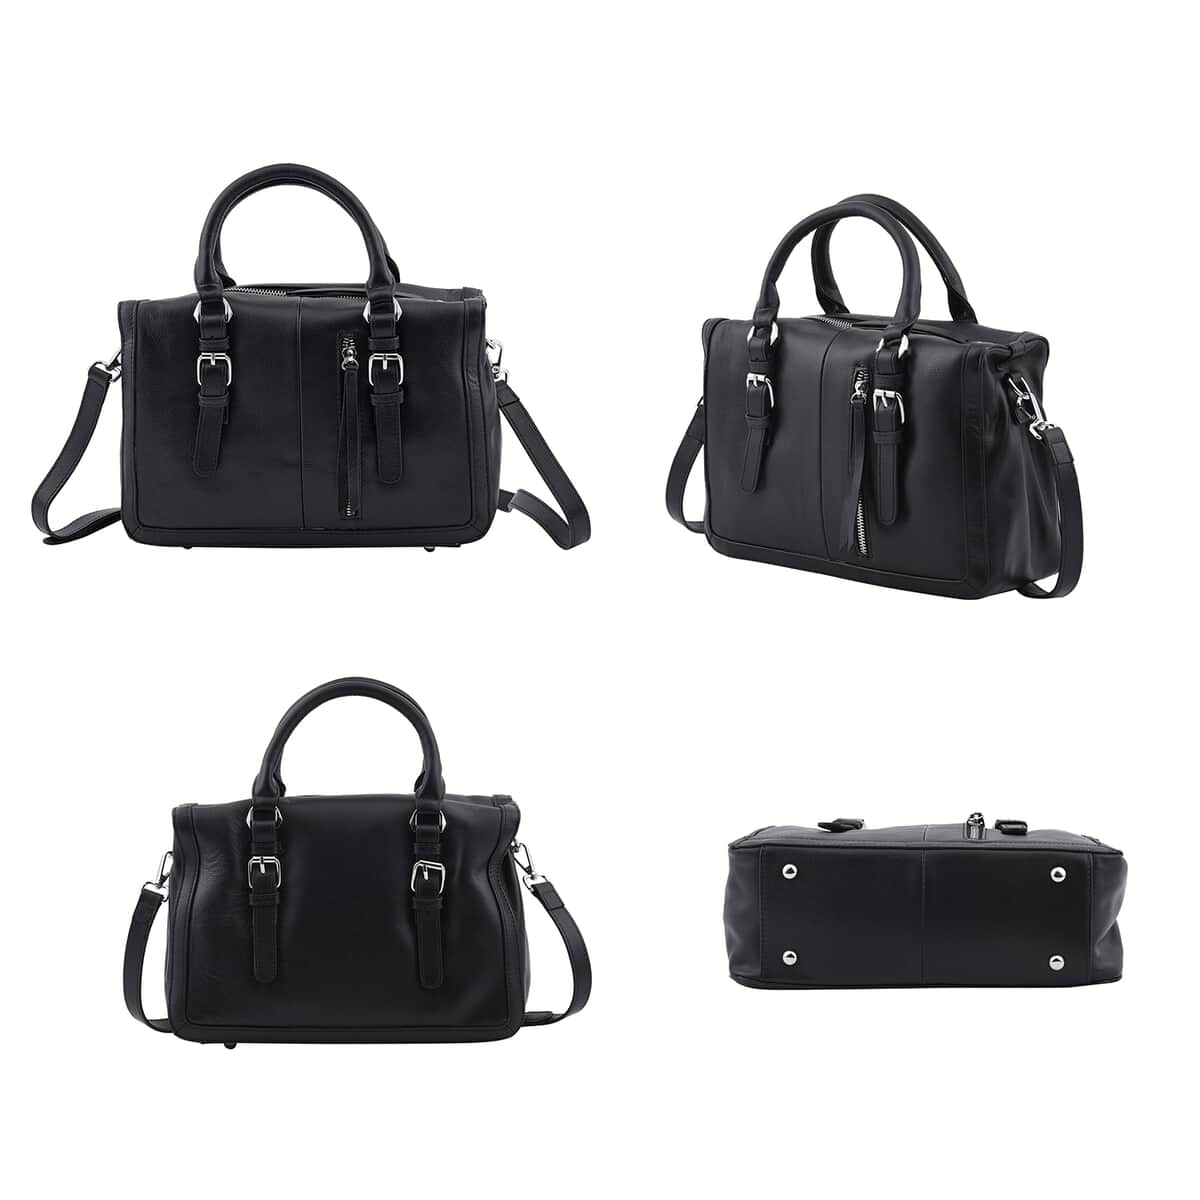 Black Genuine Leather Tote Bag (11.81"X4.72"X7.87") with Top Double Handles and Shoulder Strap image number 3